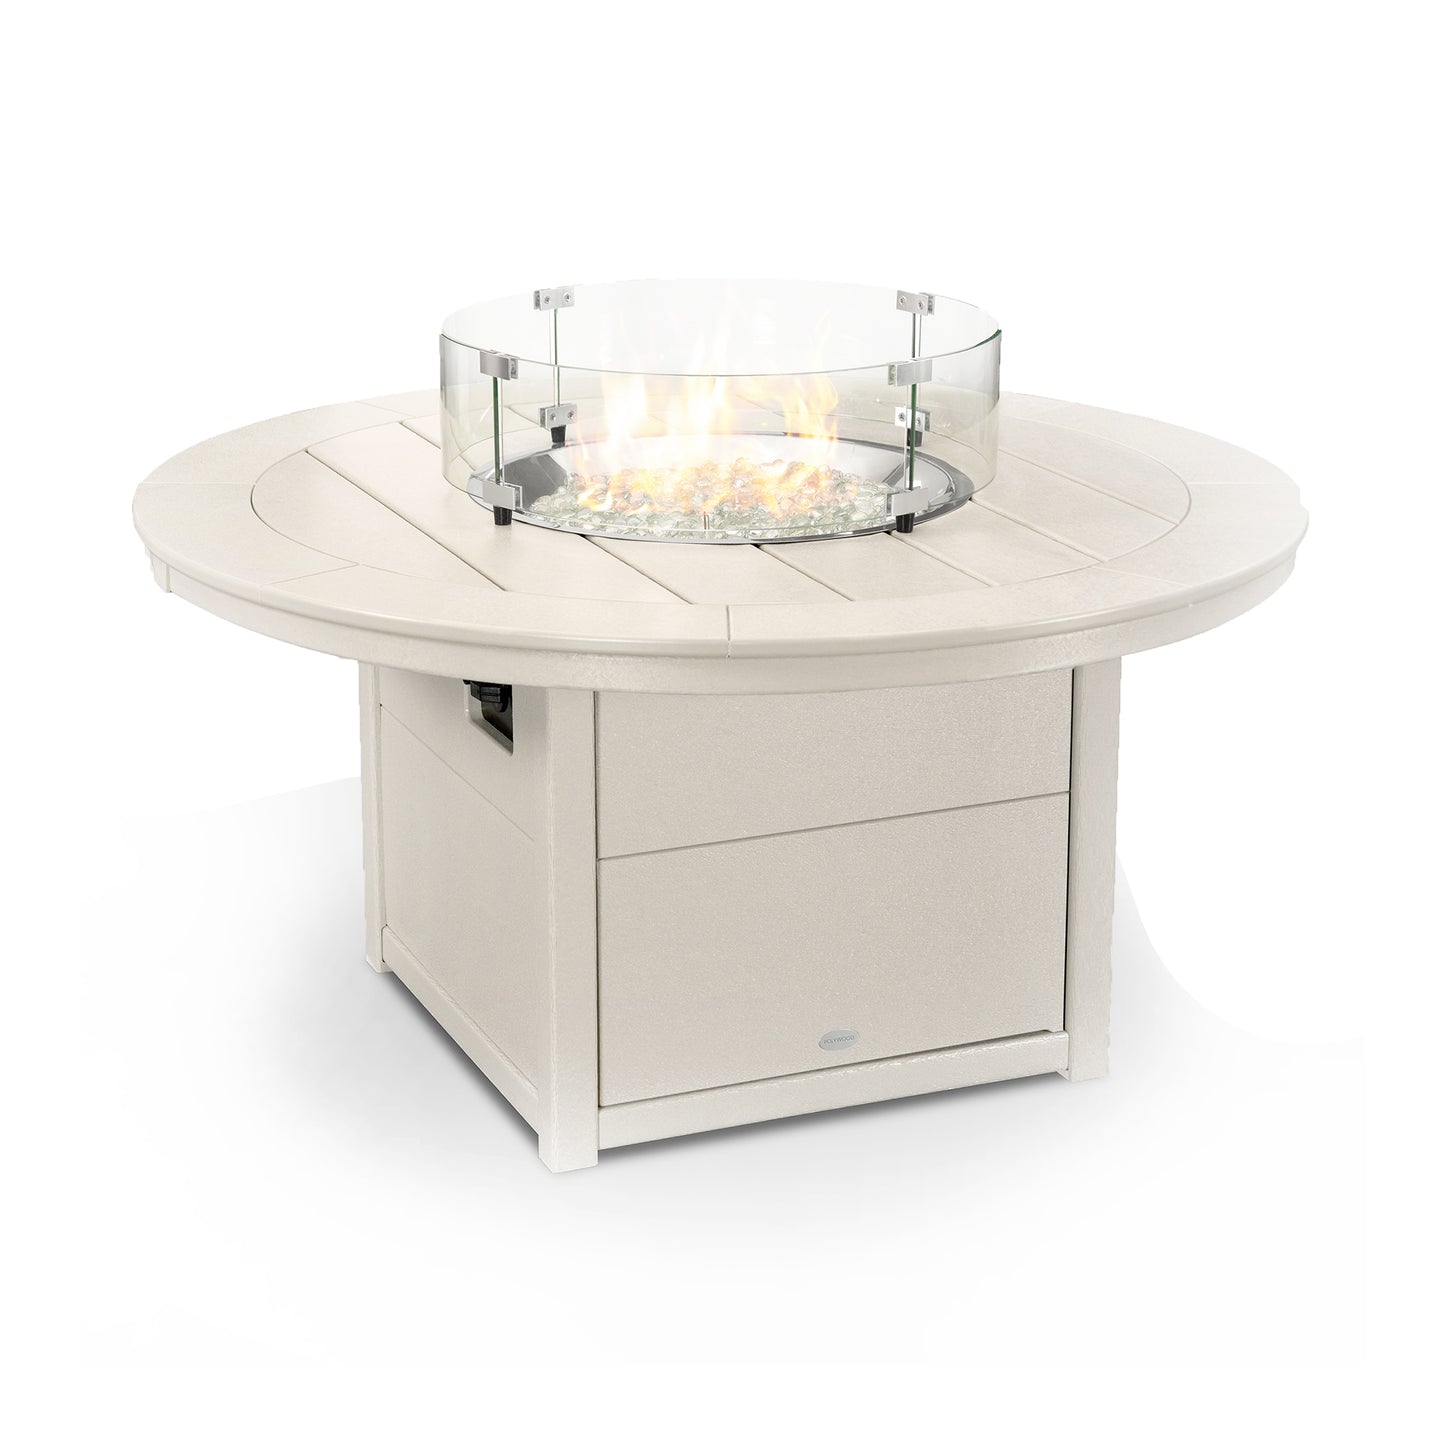 A round, beige POLYWOOD® Round 48" Fire Pit Table with a glass wind guard and decorative pebbles visible through the glass, set against a white background.